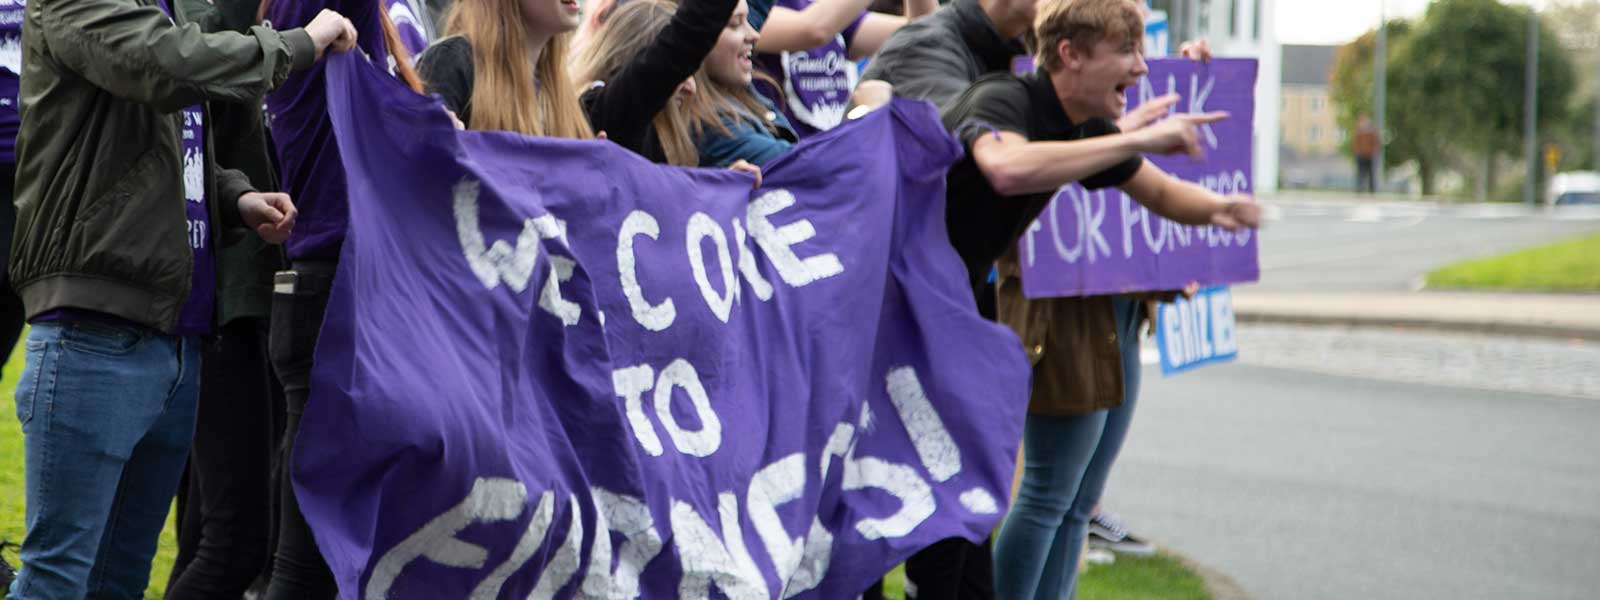 Students holding Furness welcome banners